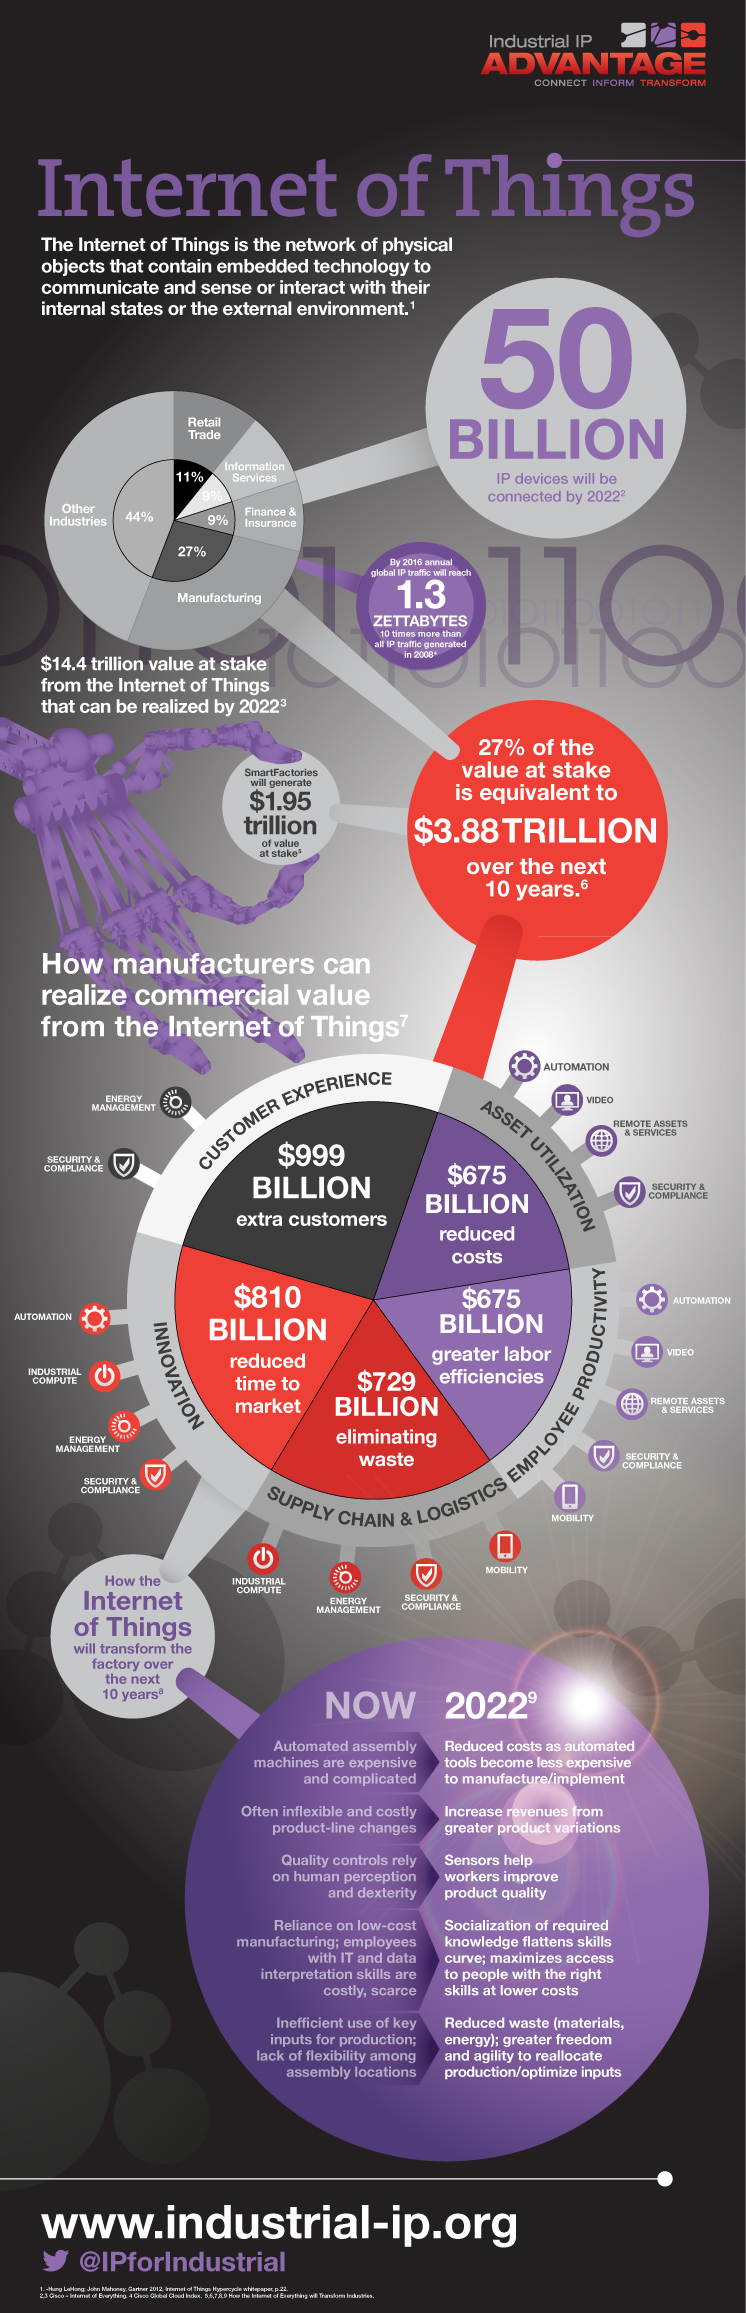 Internet of Things infographic